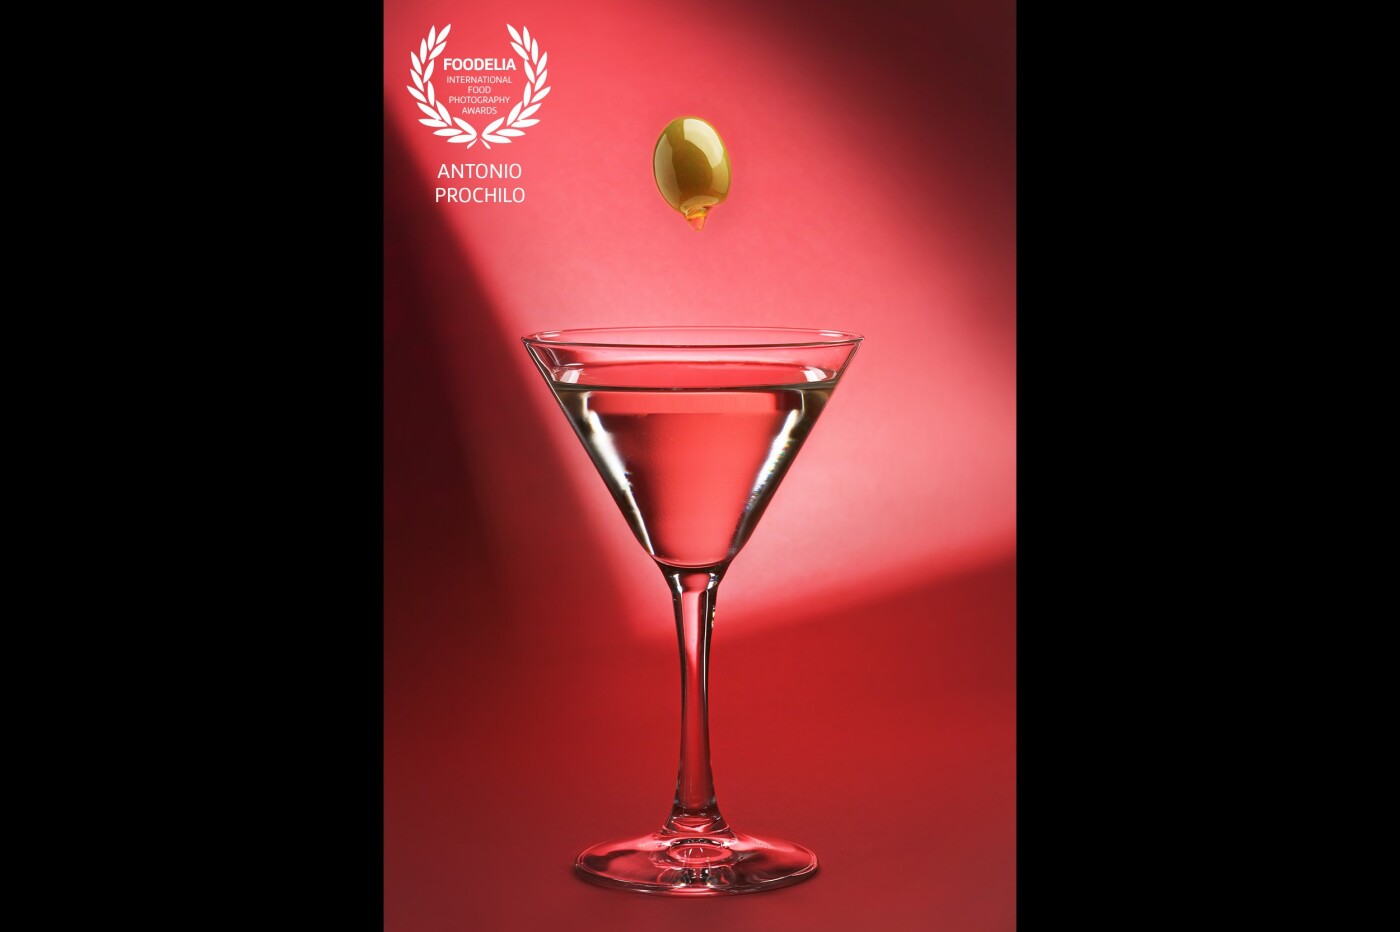 The simplicity of a vegetable ingredient, a green olive, at the service of a cocktail known all over the world: the Dry Martini.